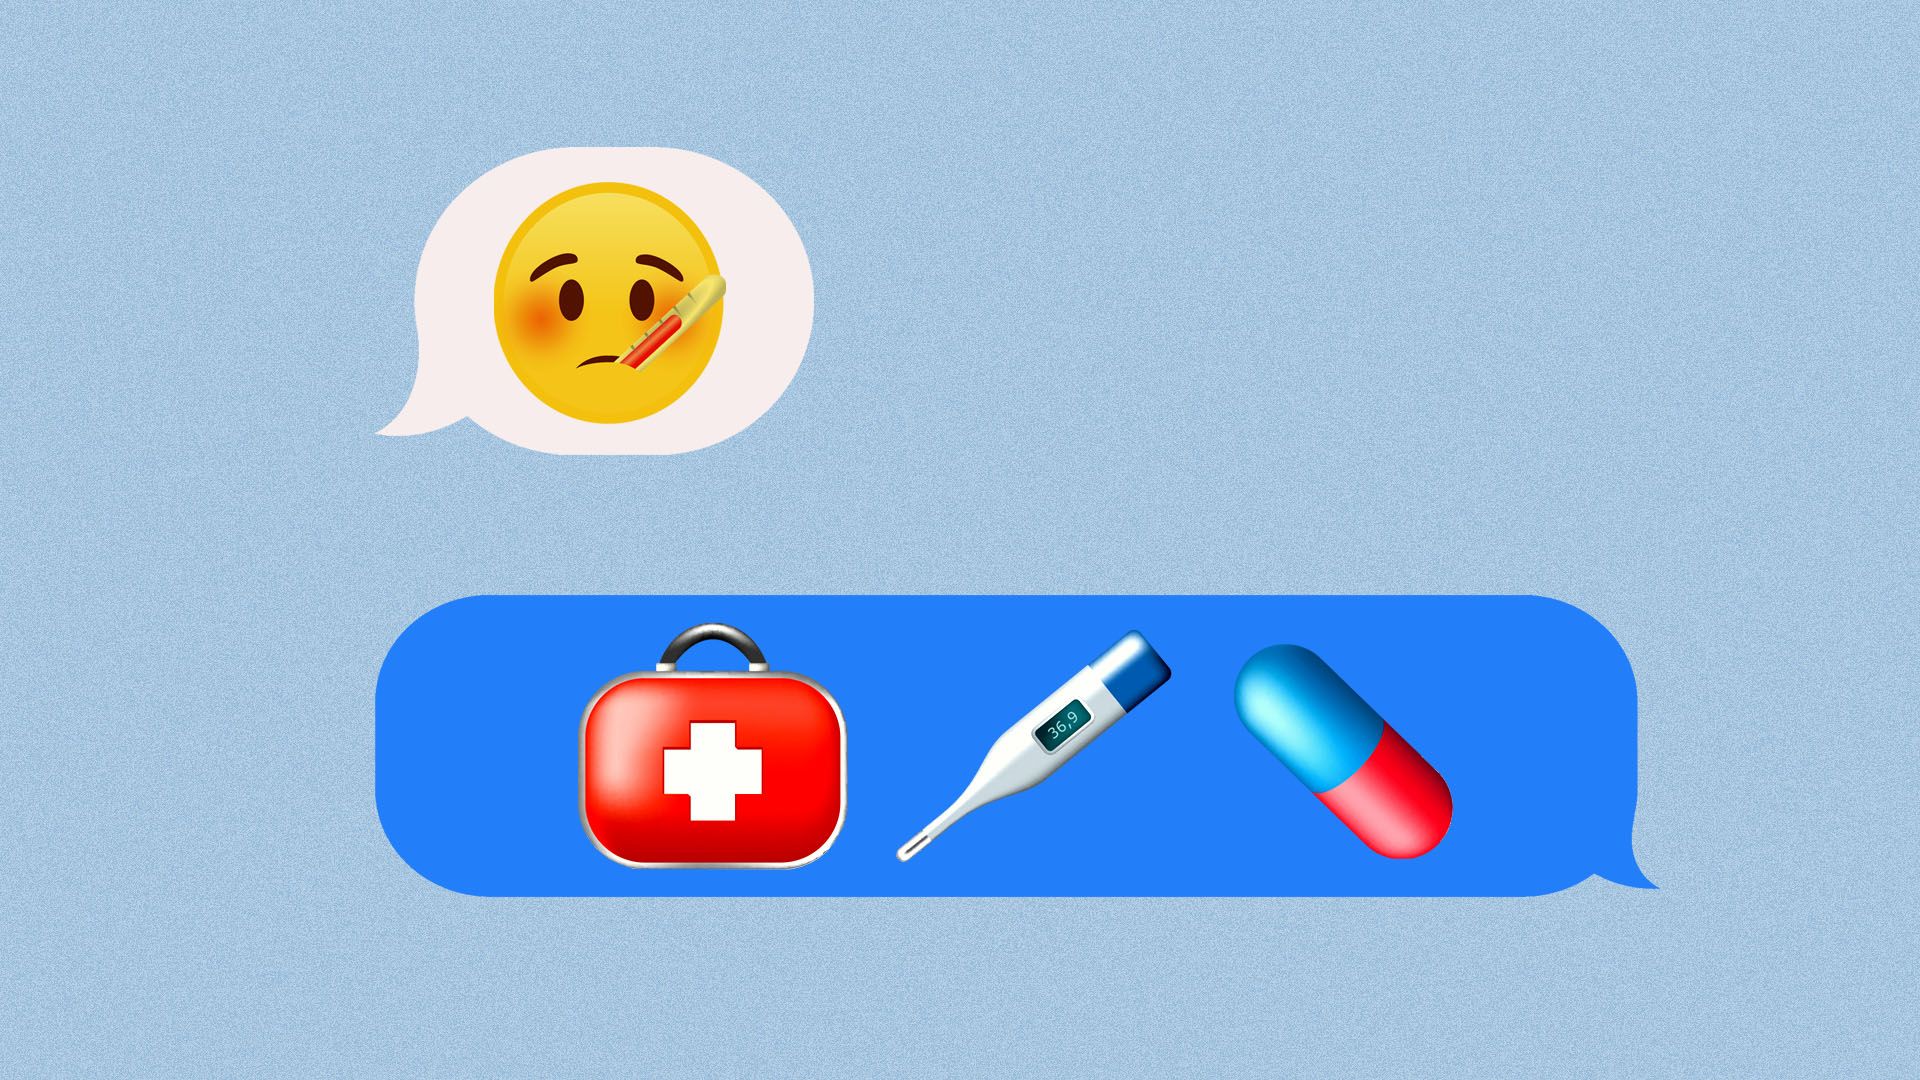 Illustration of a text message conversation featuring a sick person emoji, and a medical kit, shot, and pill emojis